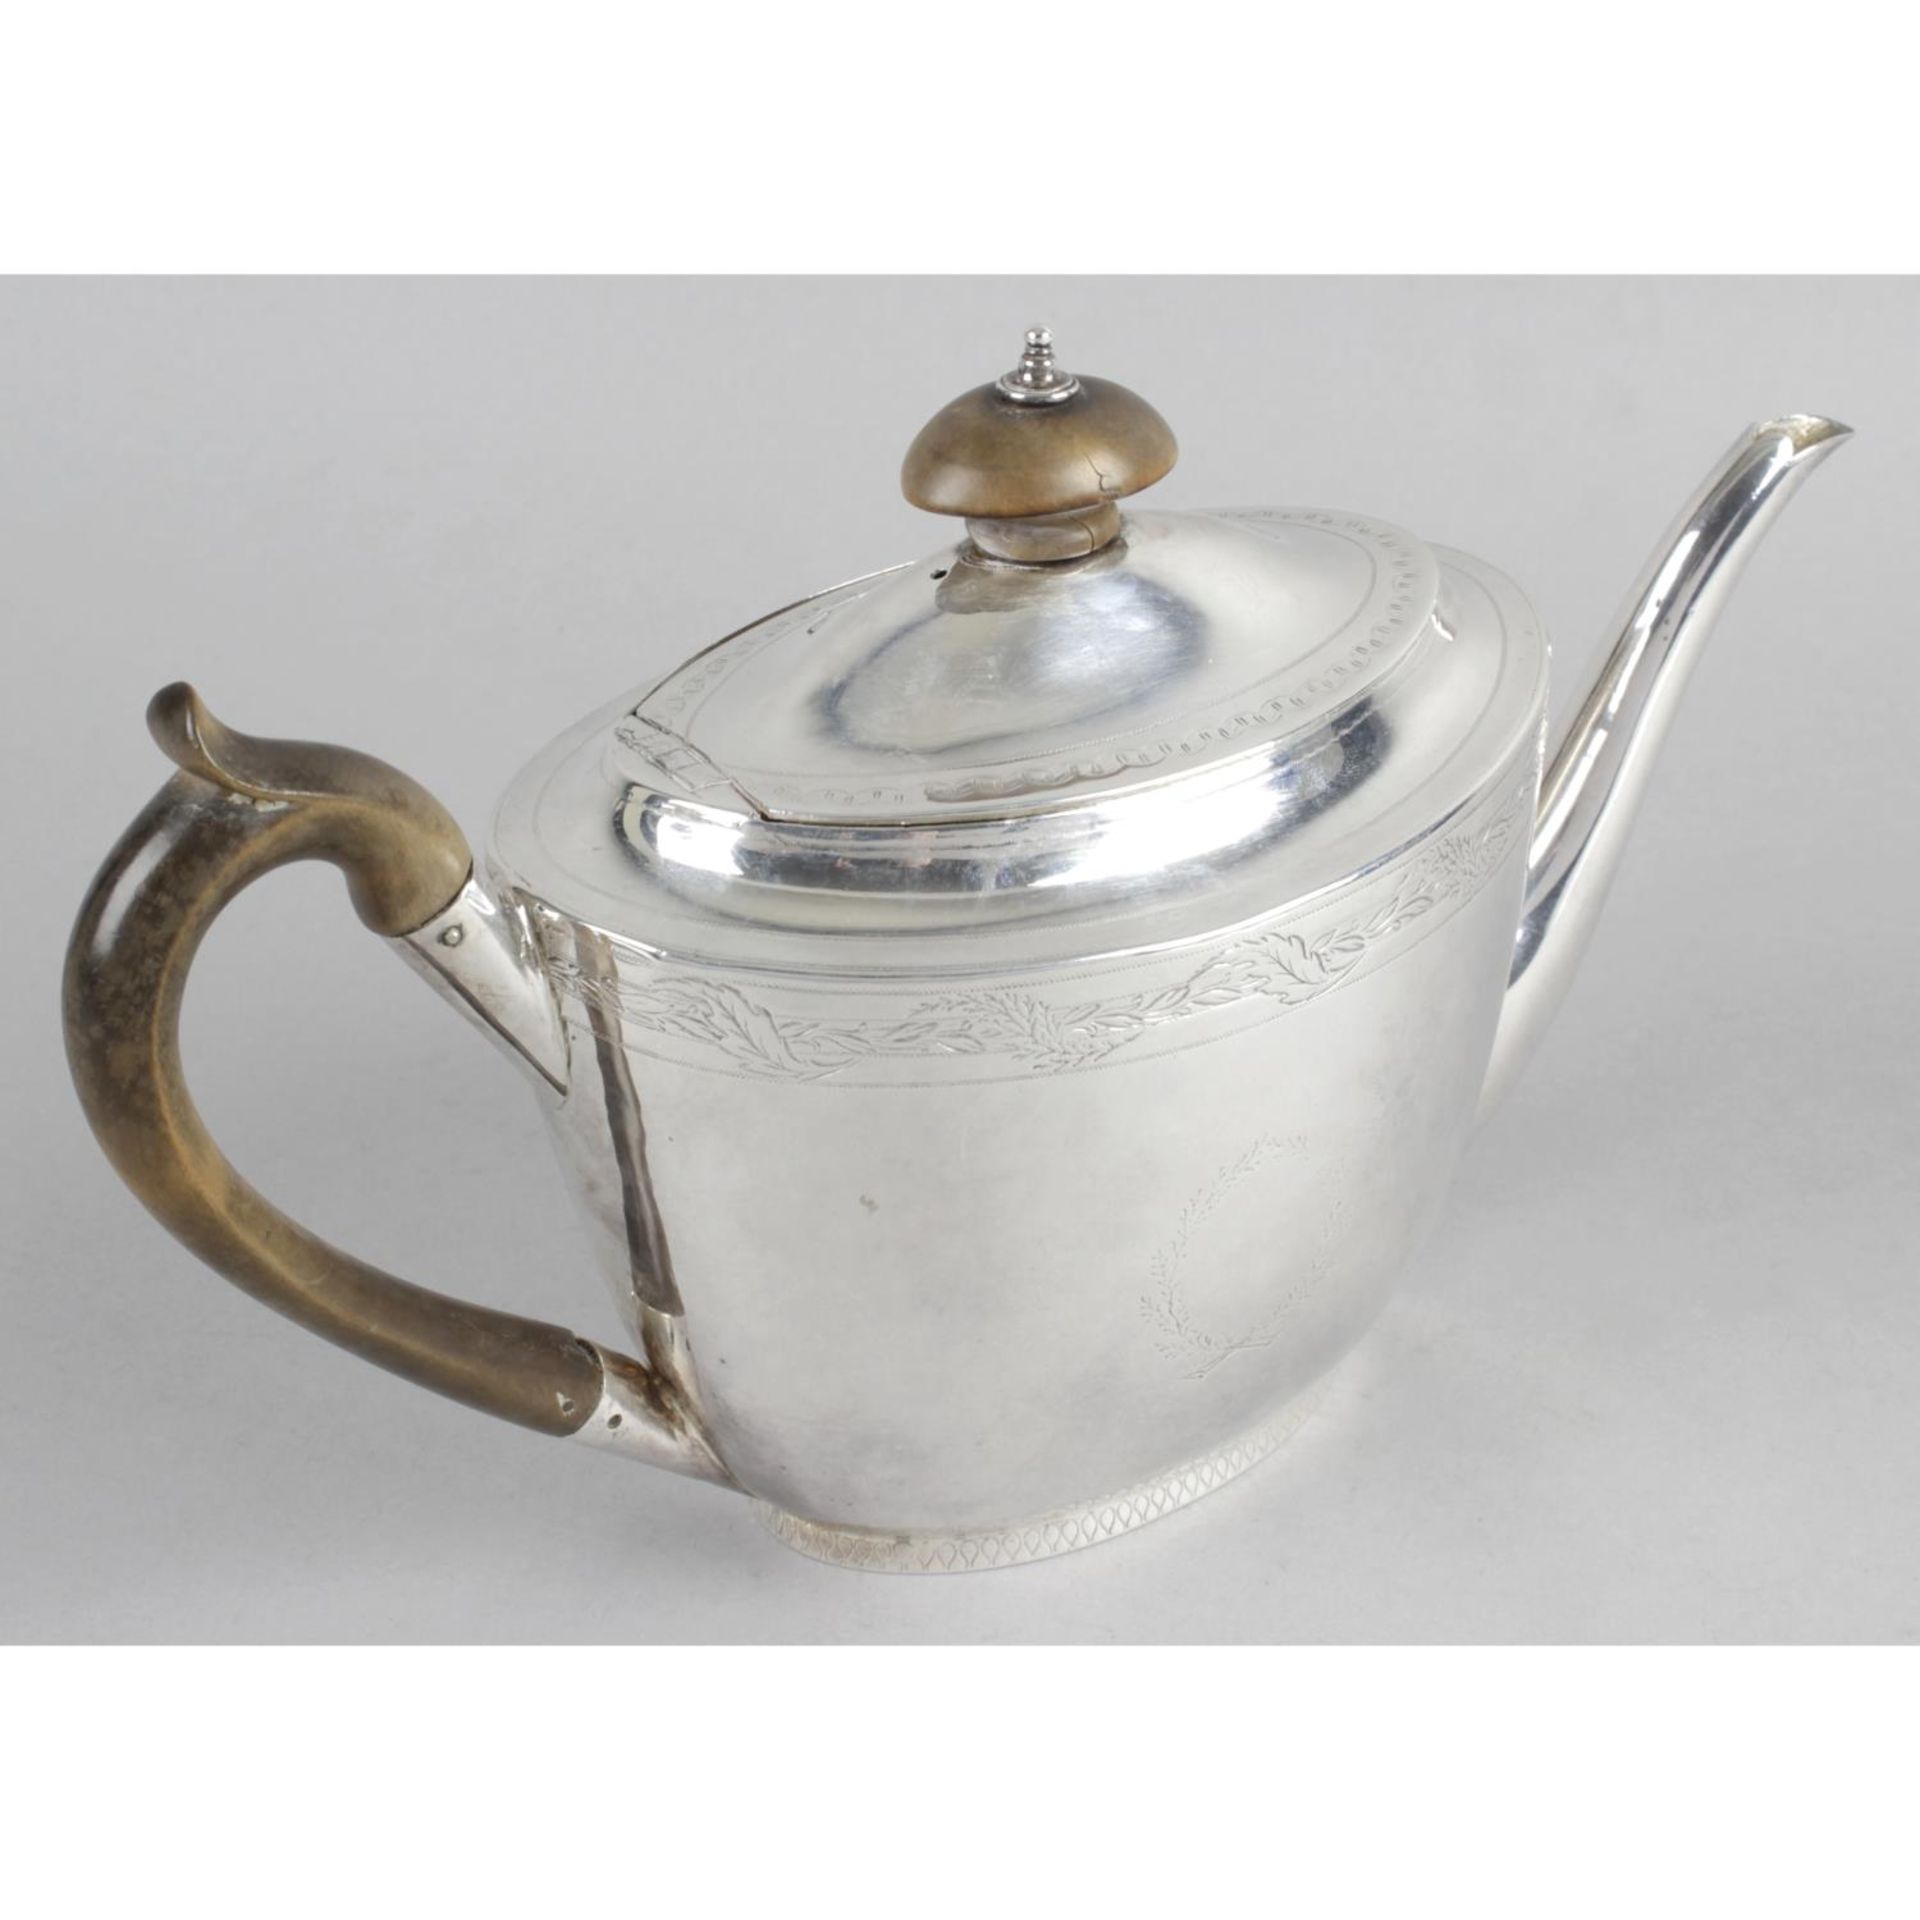 A George III silver teapot by John Emes, - Image 2 of 3